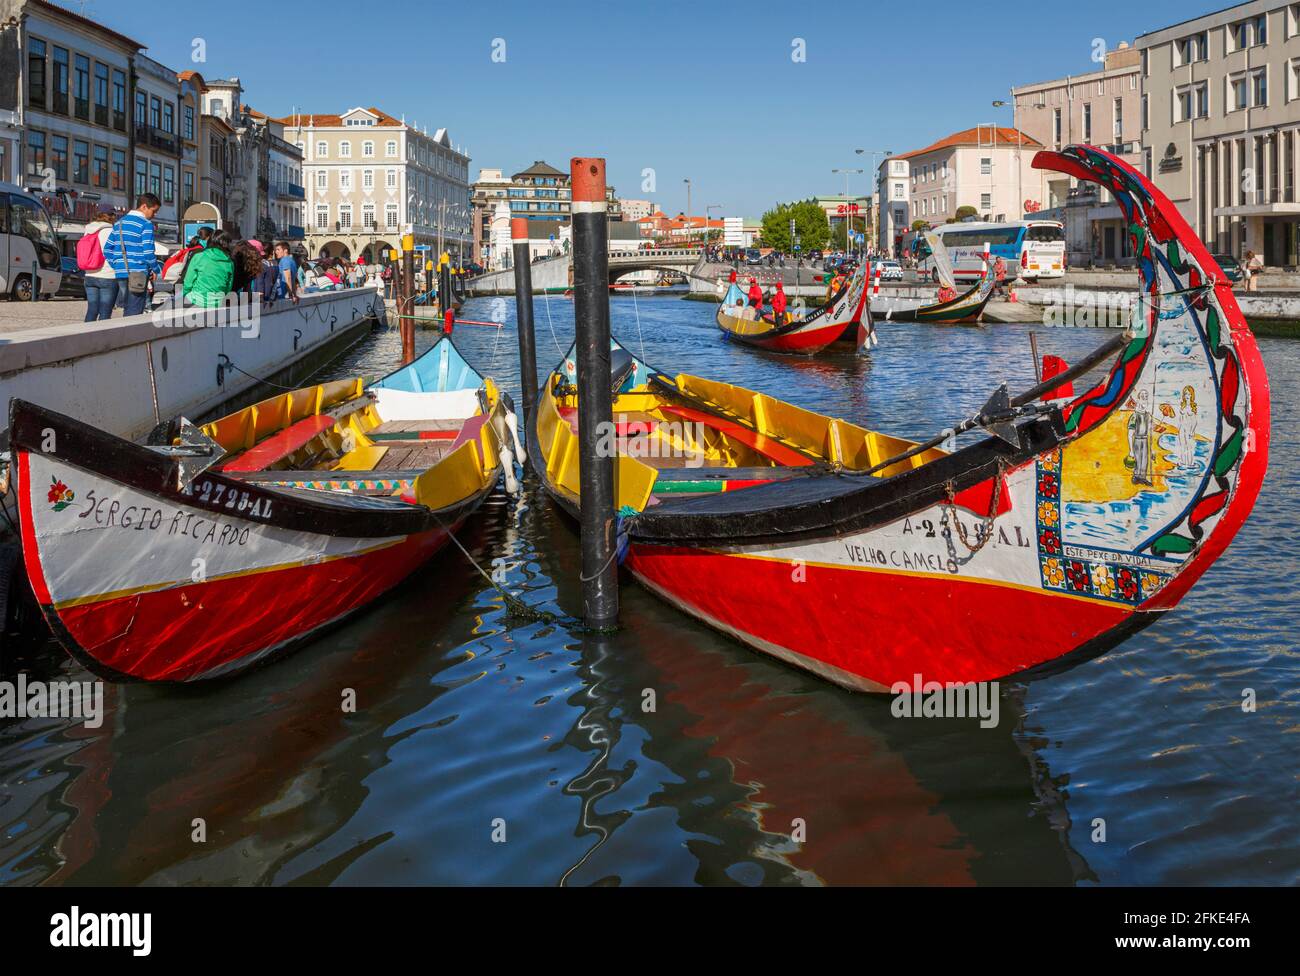 Aveiro, Aveiro District, Portugal.  Boats known as moliceiros traditionally used for fishing but now more likely used for tourist excursions. Stock Photo